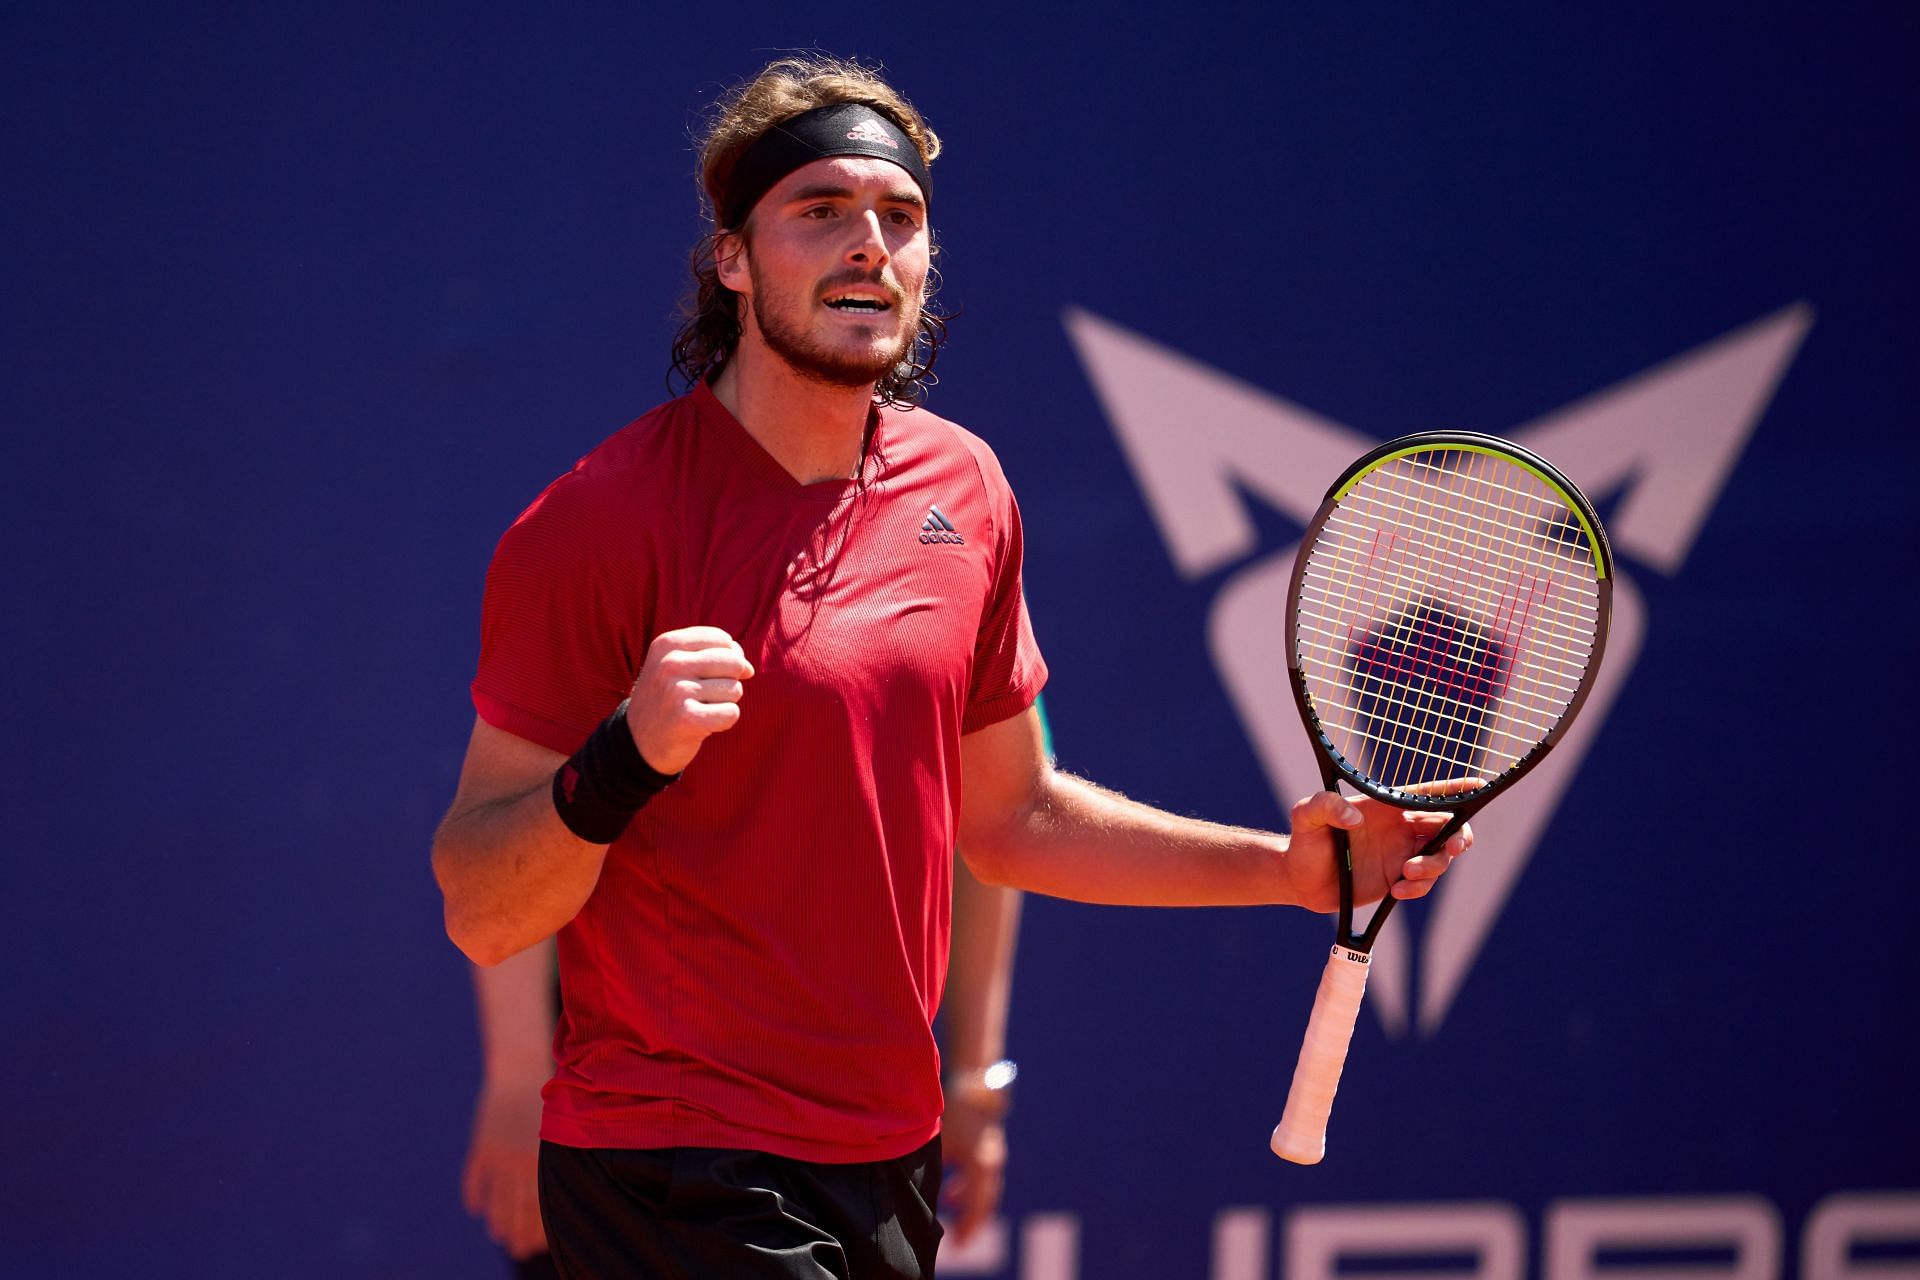 Stefanos Tsitsipas will look to win his first title in Barcelona this week